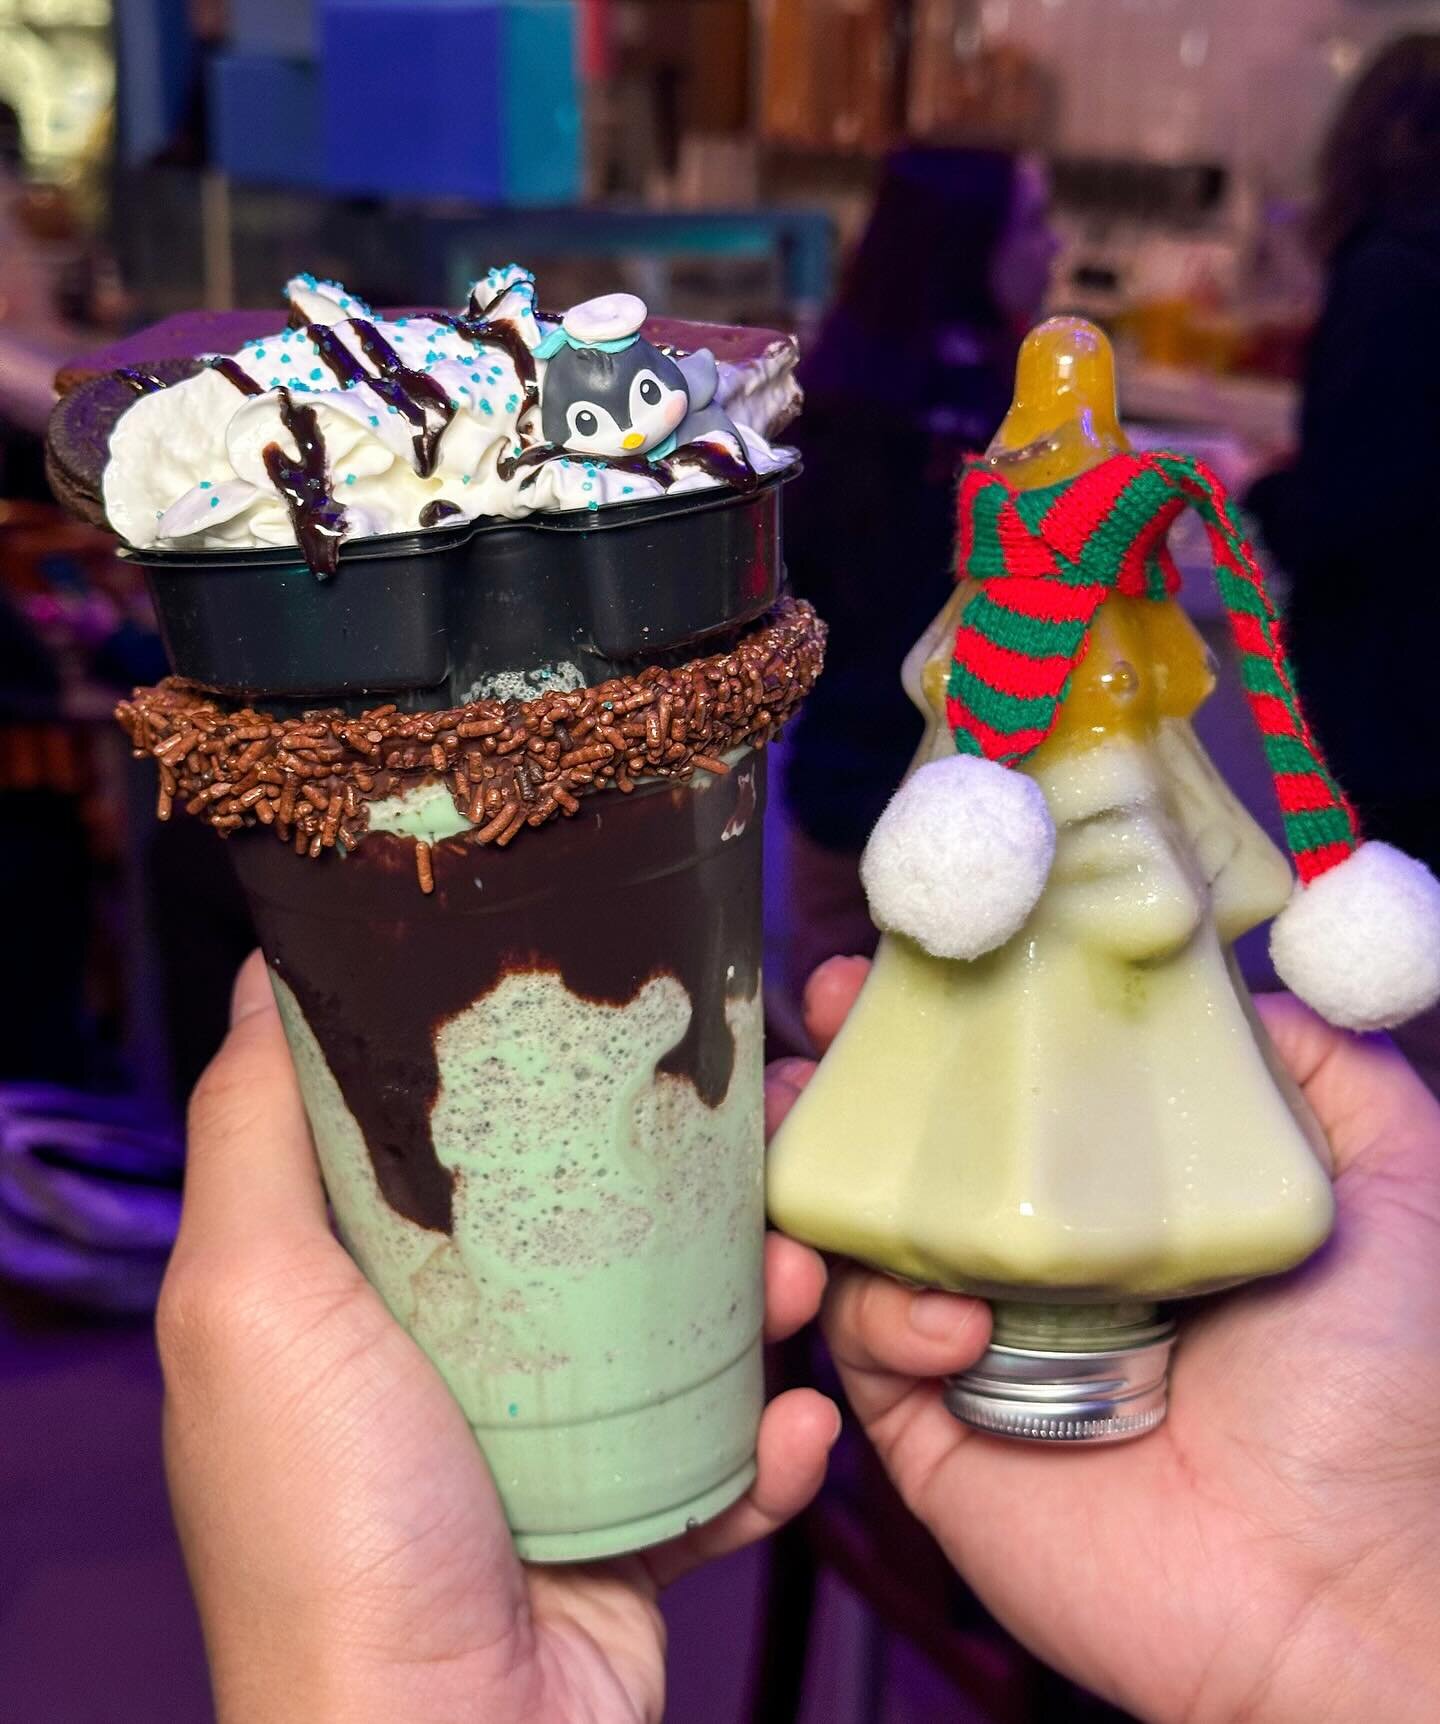 LAST DAY TO JOIN US FOR OUR WHIMSICAL WINTER CHOCOLATE EMPORIUM POP-UP! Experience the magic one last time before it&rsquo;s gone! 

🍬 Join us this December 8 - January 7 for our Whimsical Winter Chocolate Emporium pop-up! 

🍩 Take a step into our 